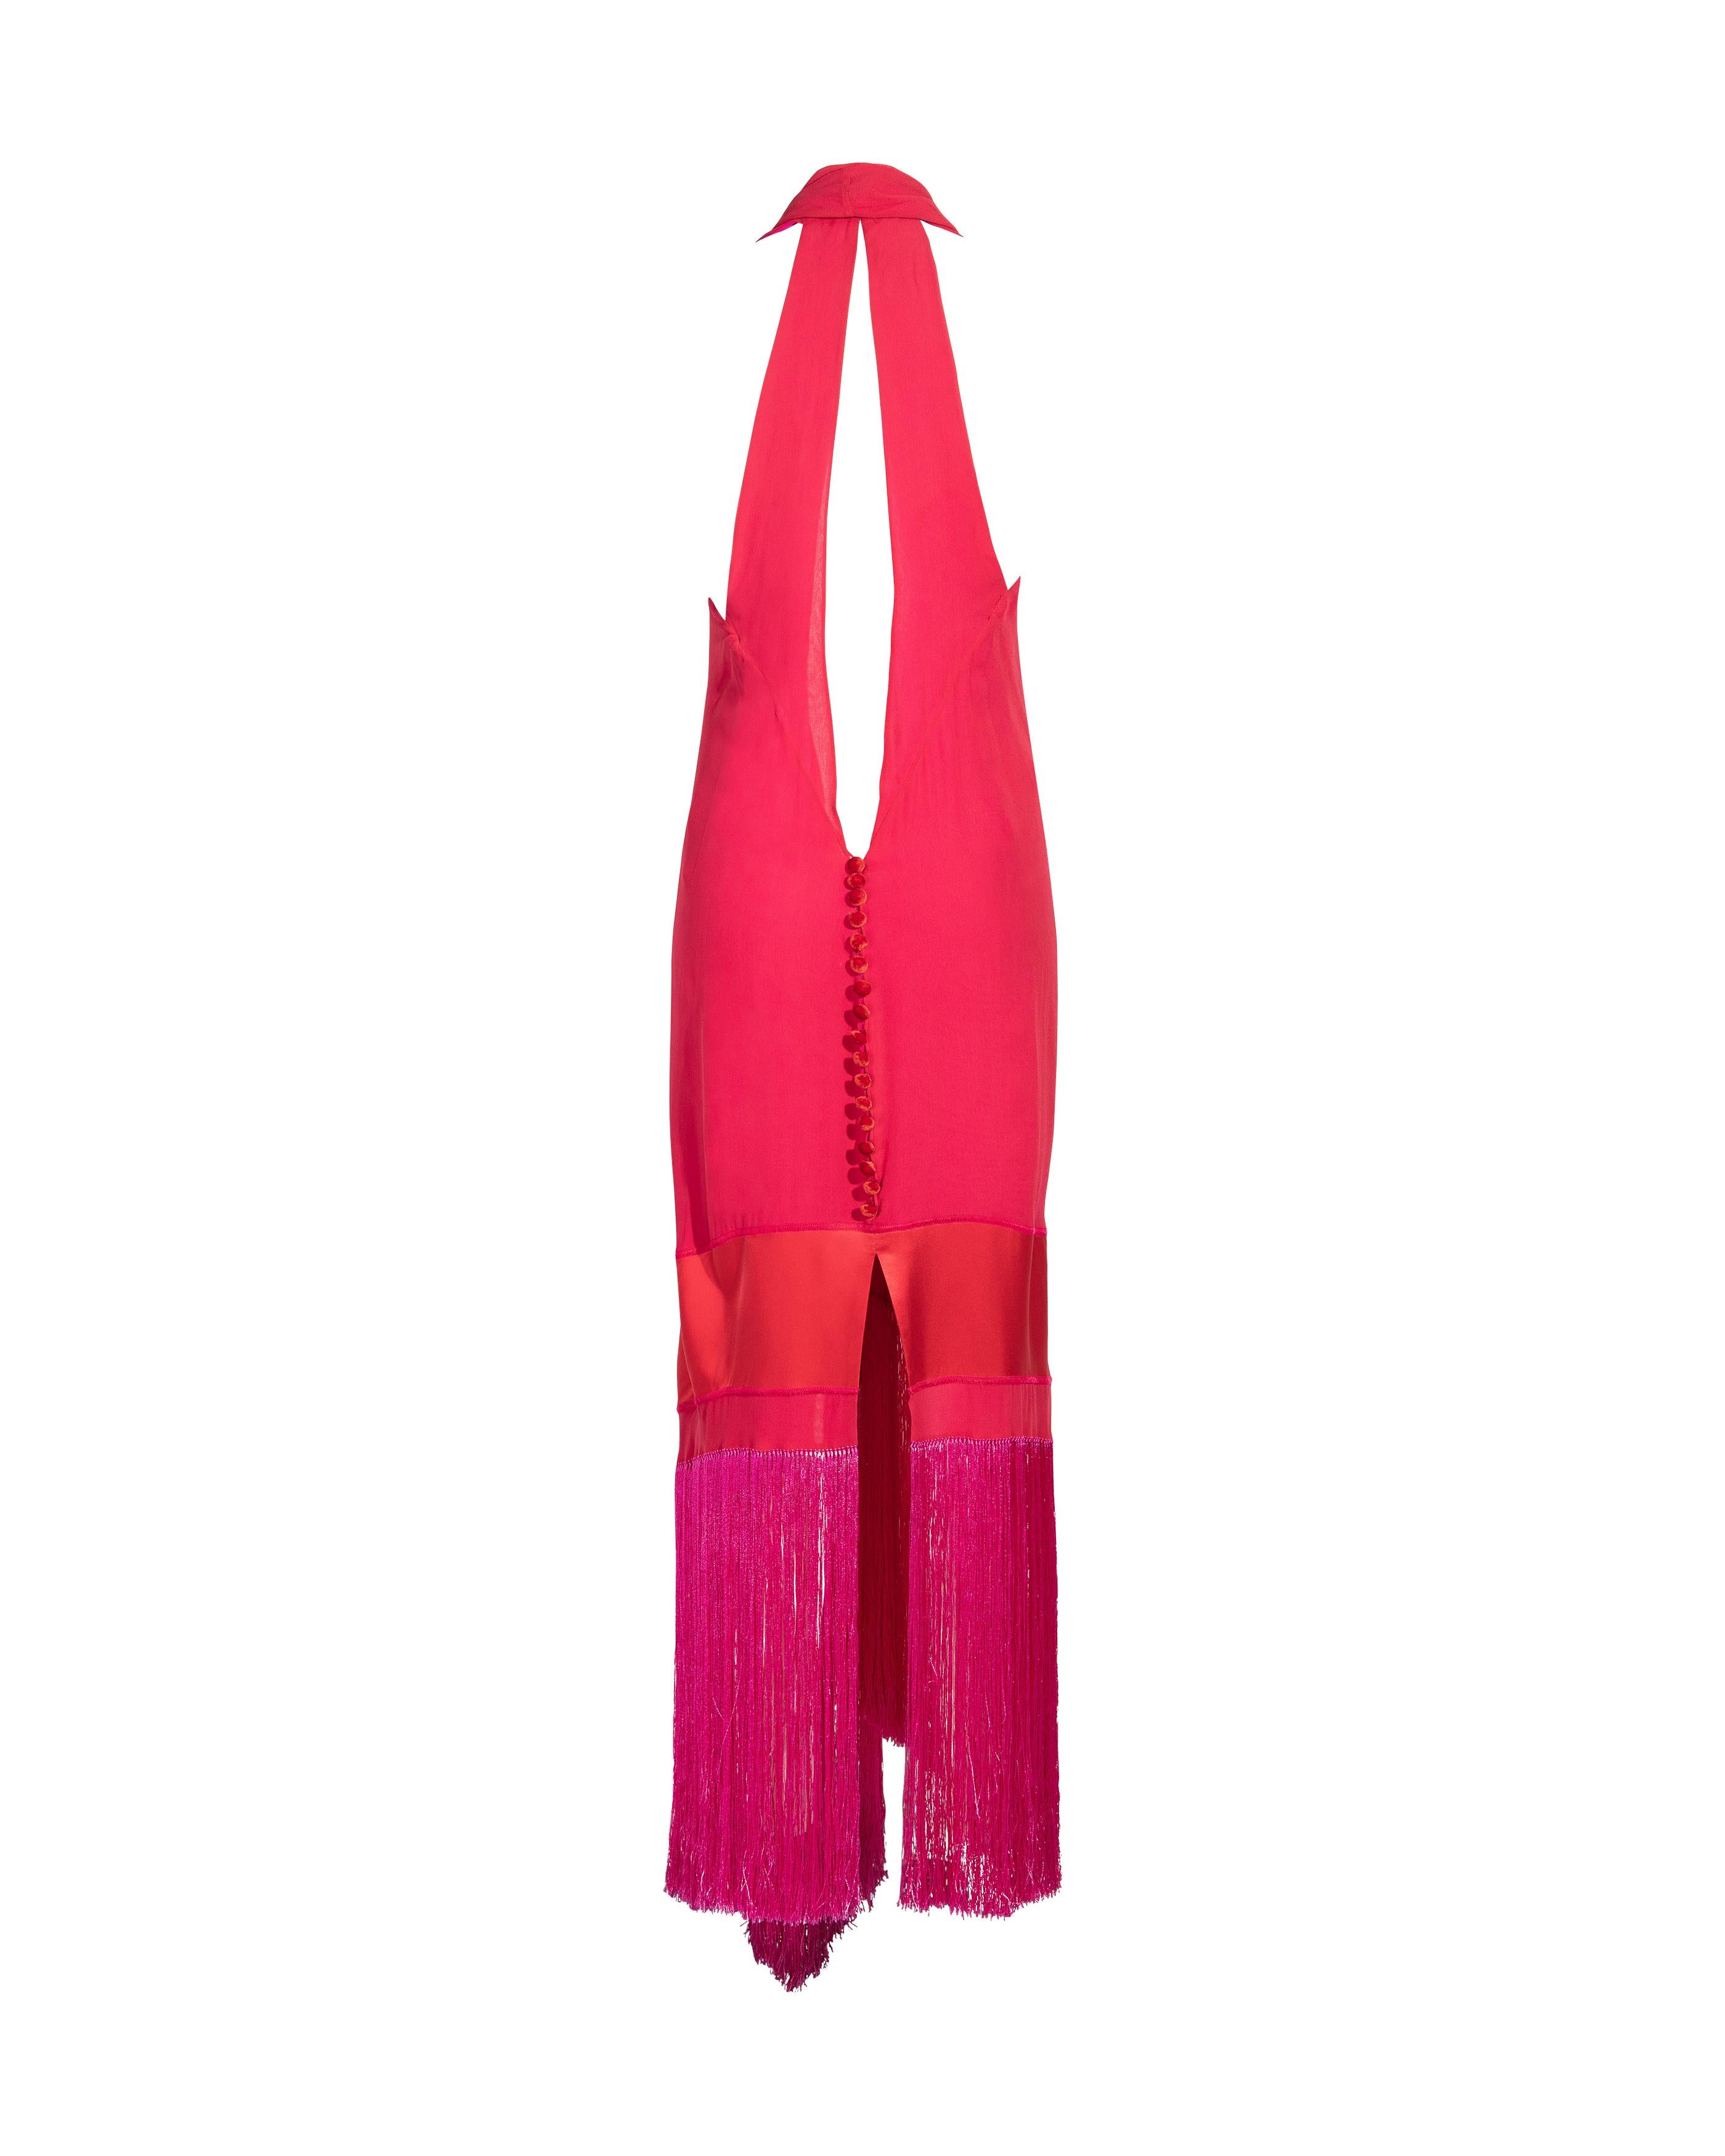 1980's Gianfranco Ferre Red Silk Midi Dress with Hot Pink Fringe In Good Condition For Sale In North Hollywood, CA